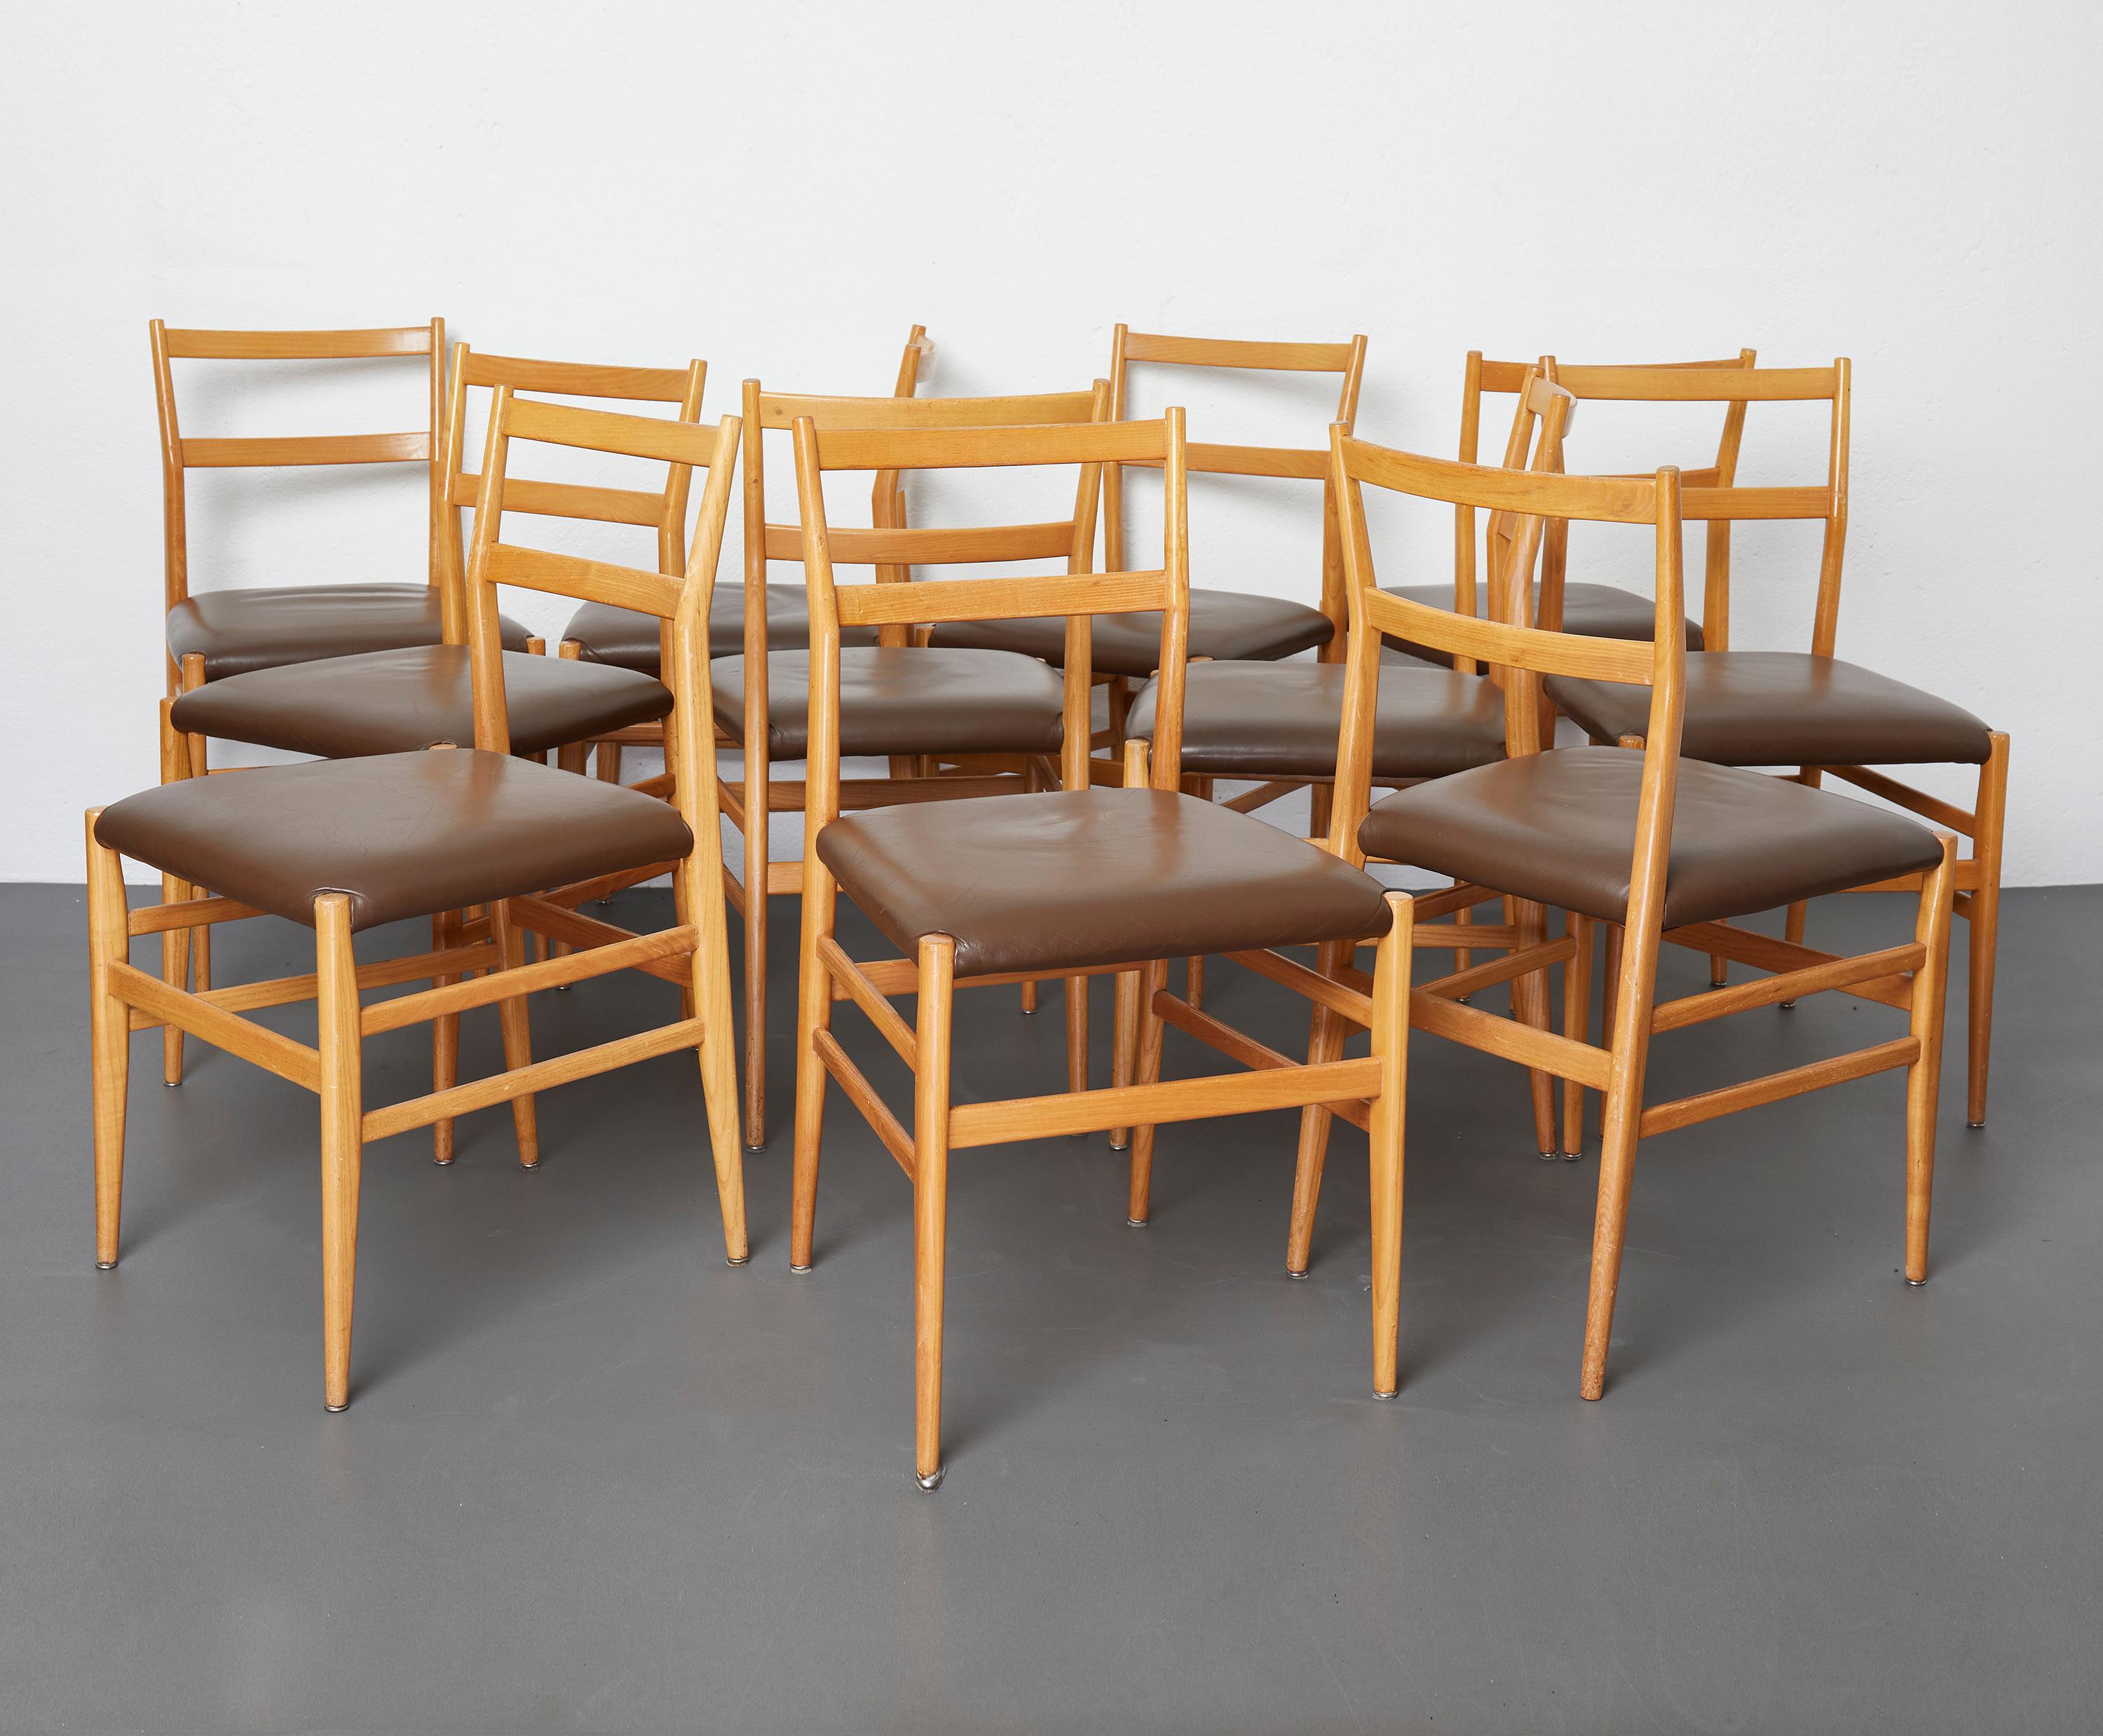 Italian Set of 12 Leggera Dining Chairs in Ash Wood and Leather by Gio Ponti for Cassina